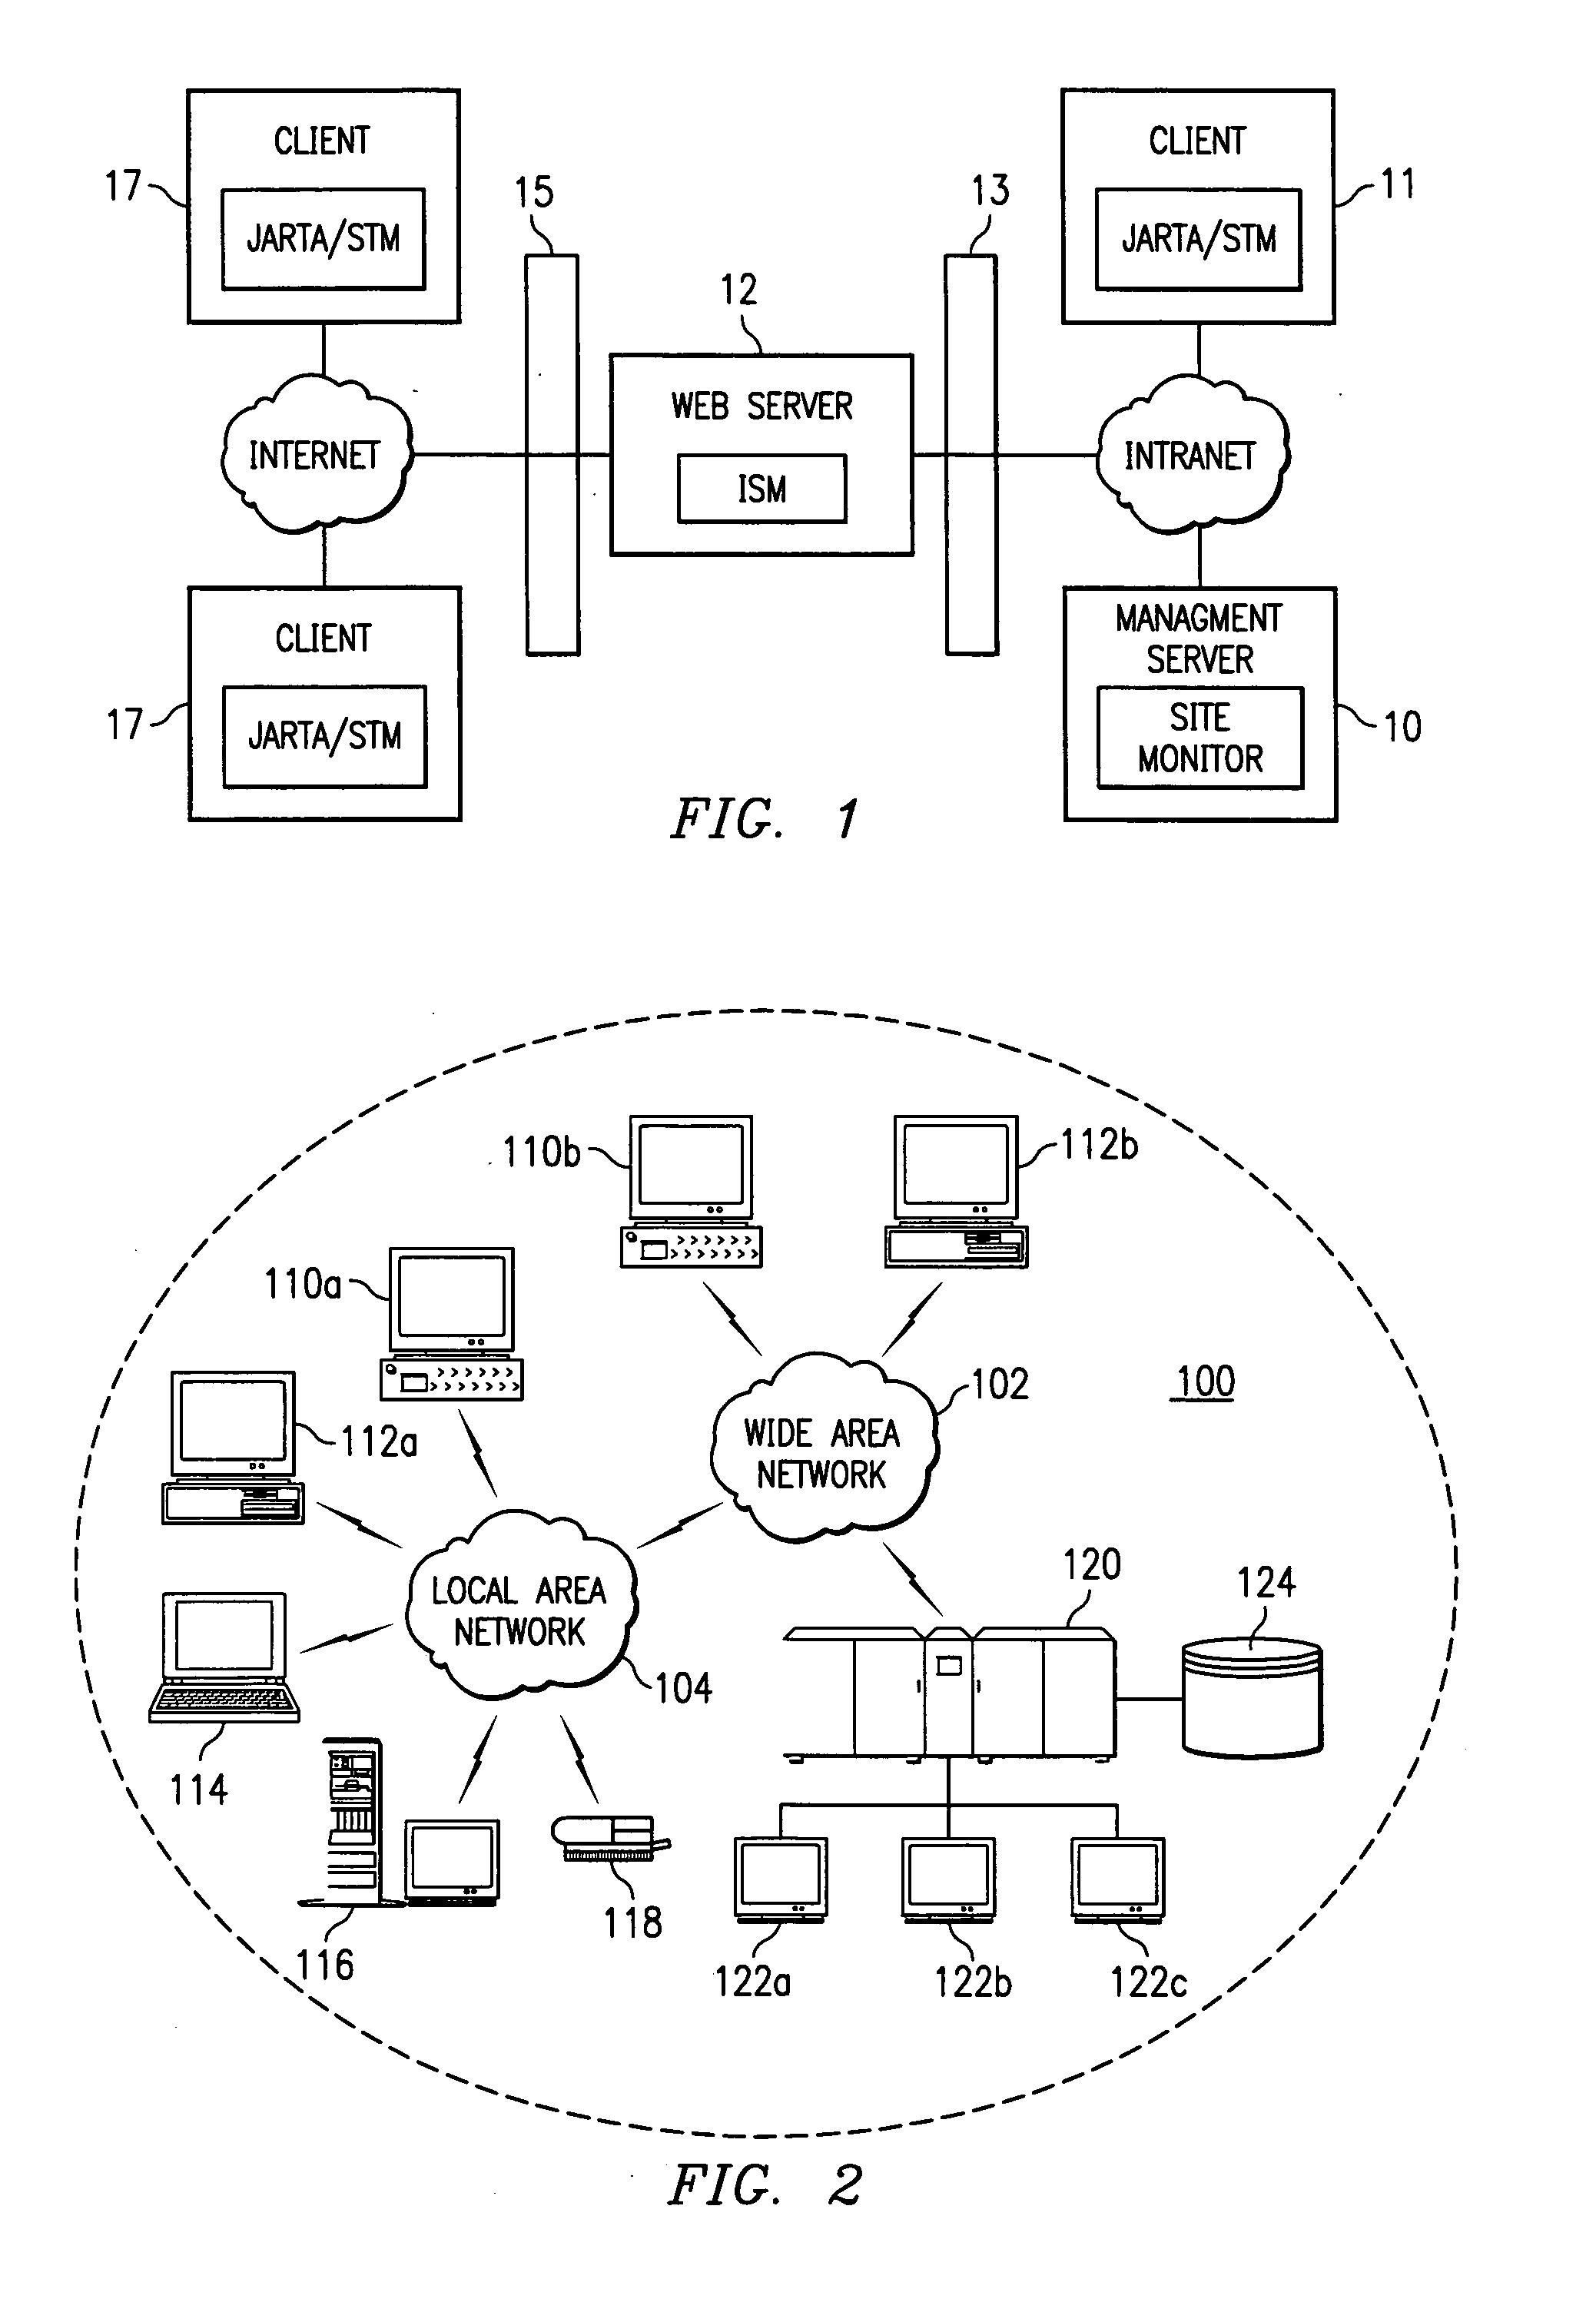 Method and system for collecting, aggregating and viewing performance data on a site-wide basis